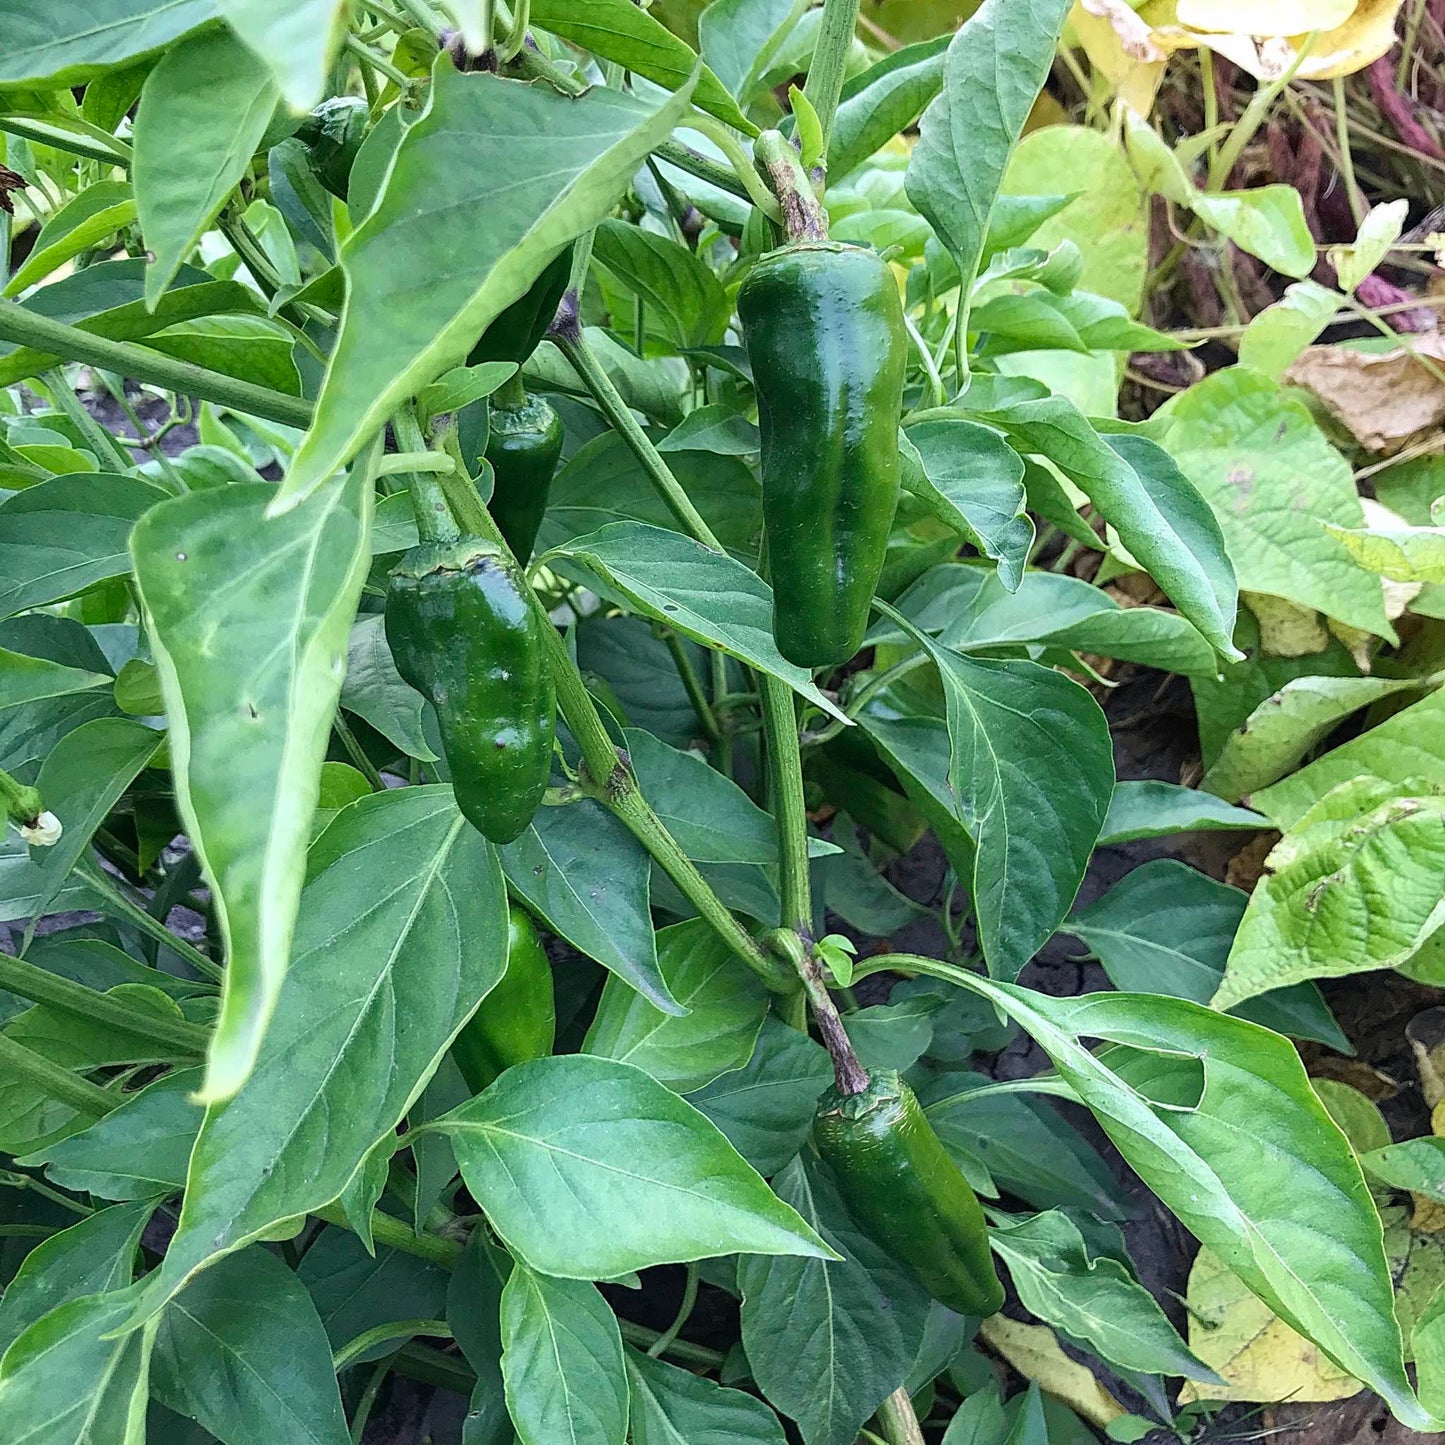 Unripe hot peppers on a leafy plant.